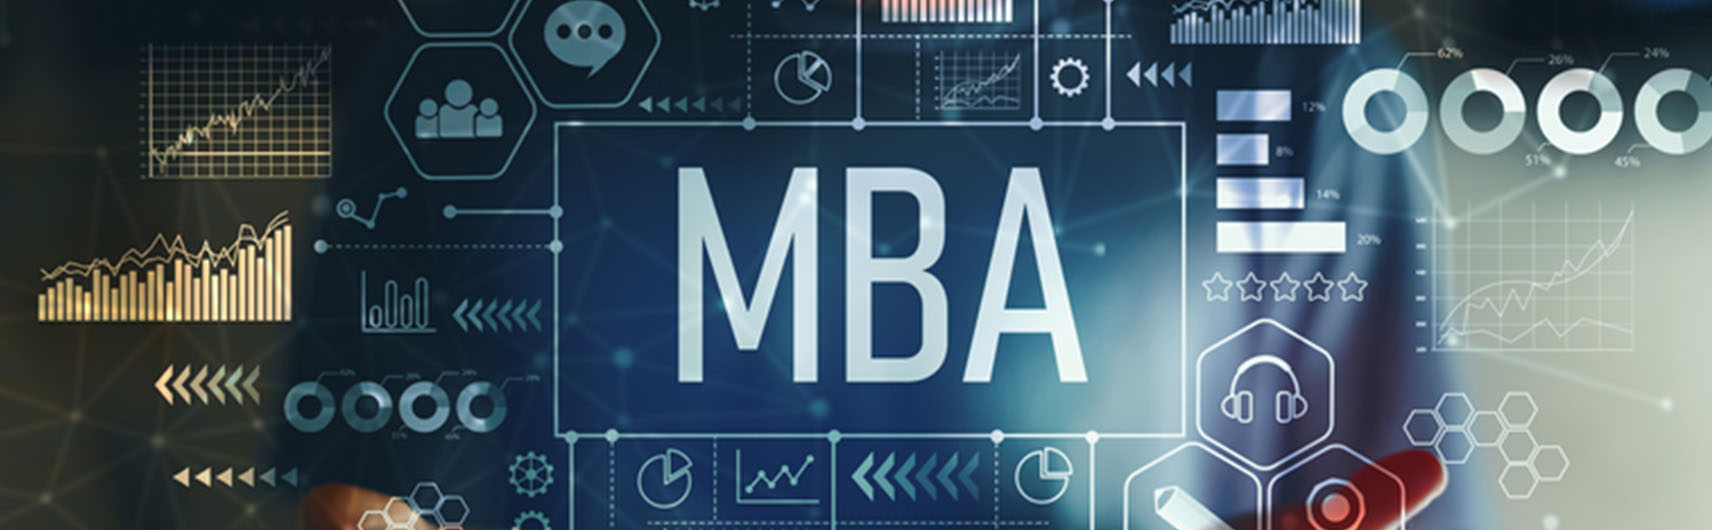 Careers in Business: Why MBA?